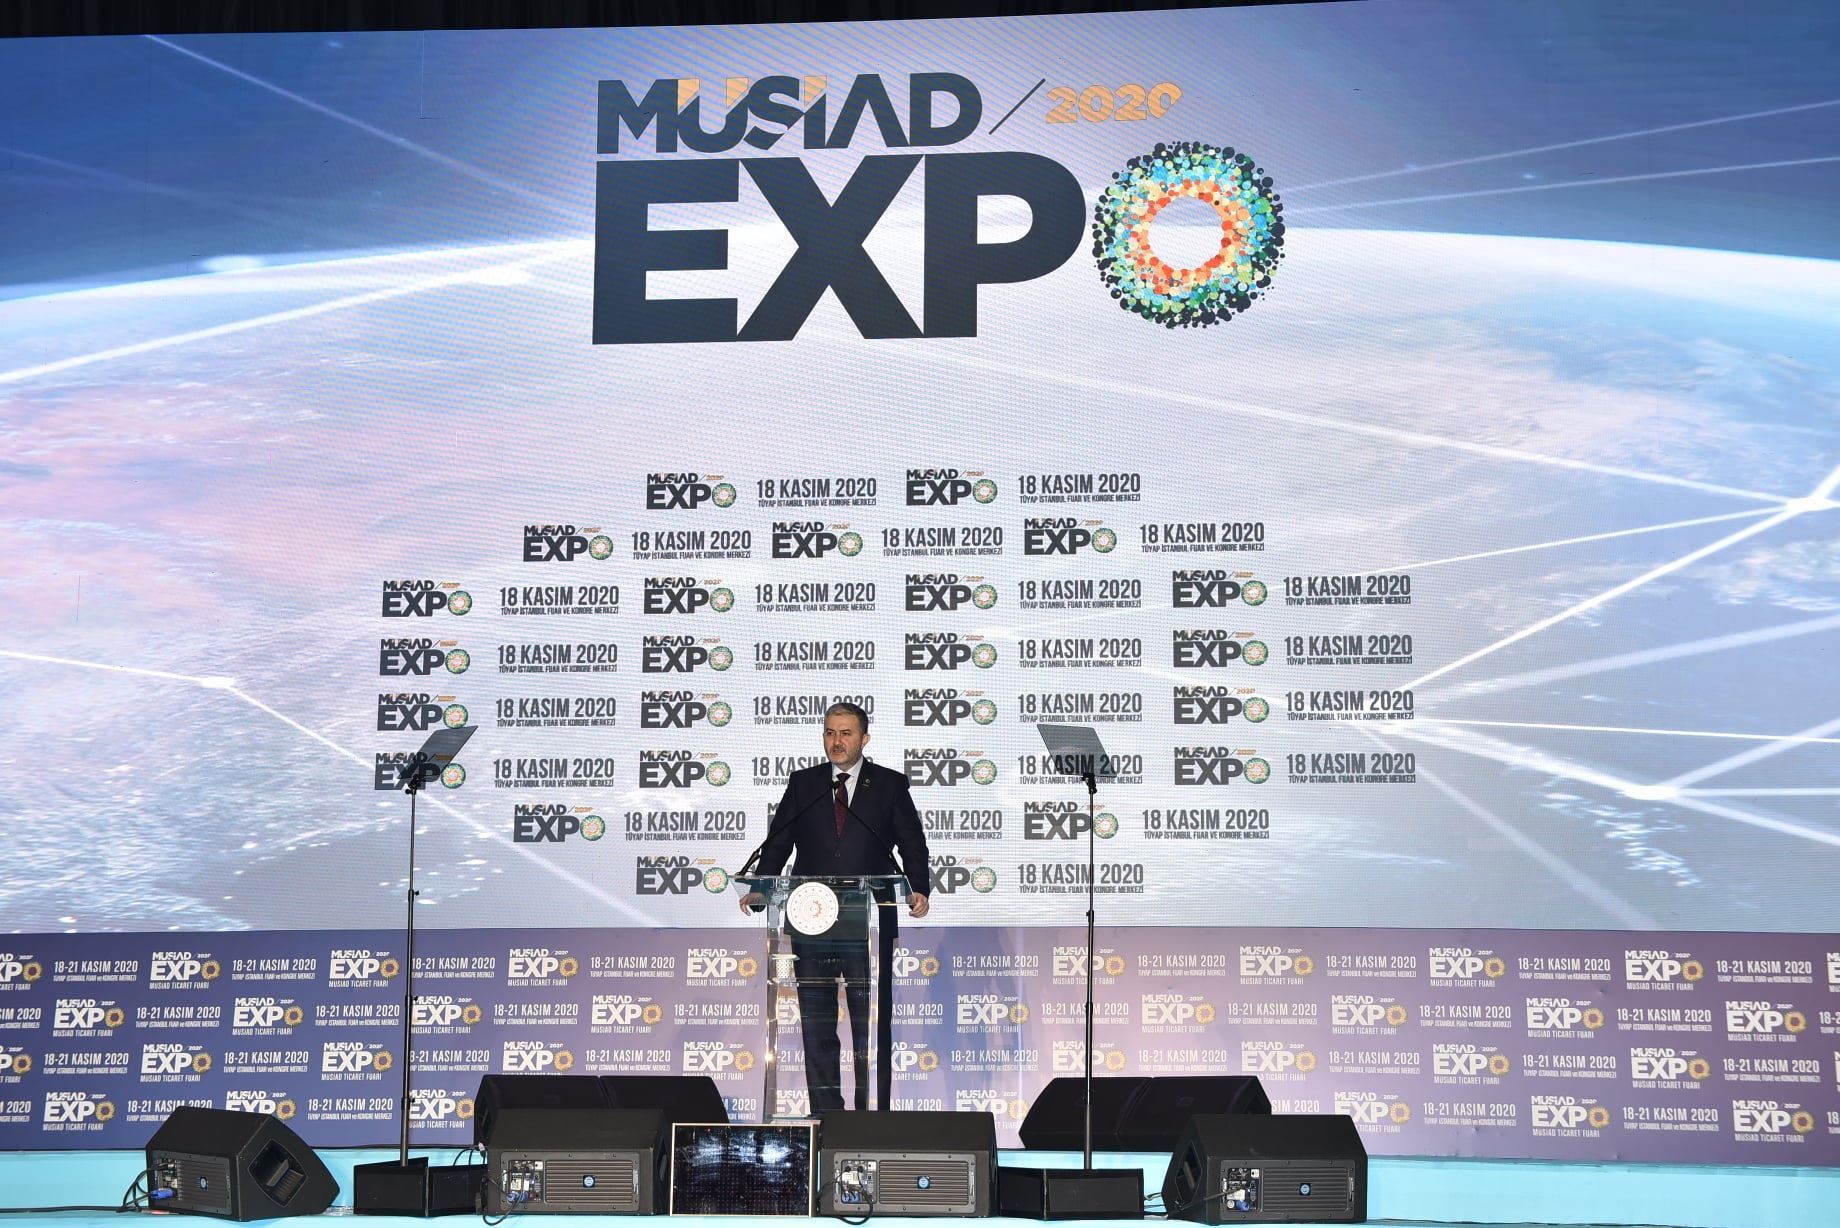 Exporters from many countries are at MUSIAD EXPO!